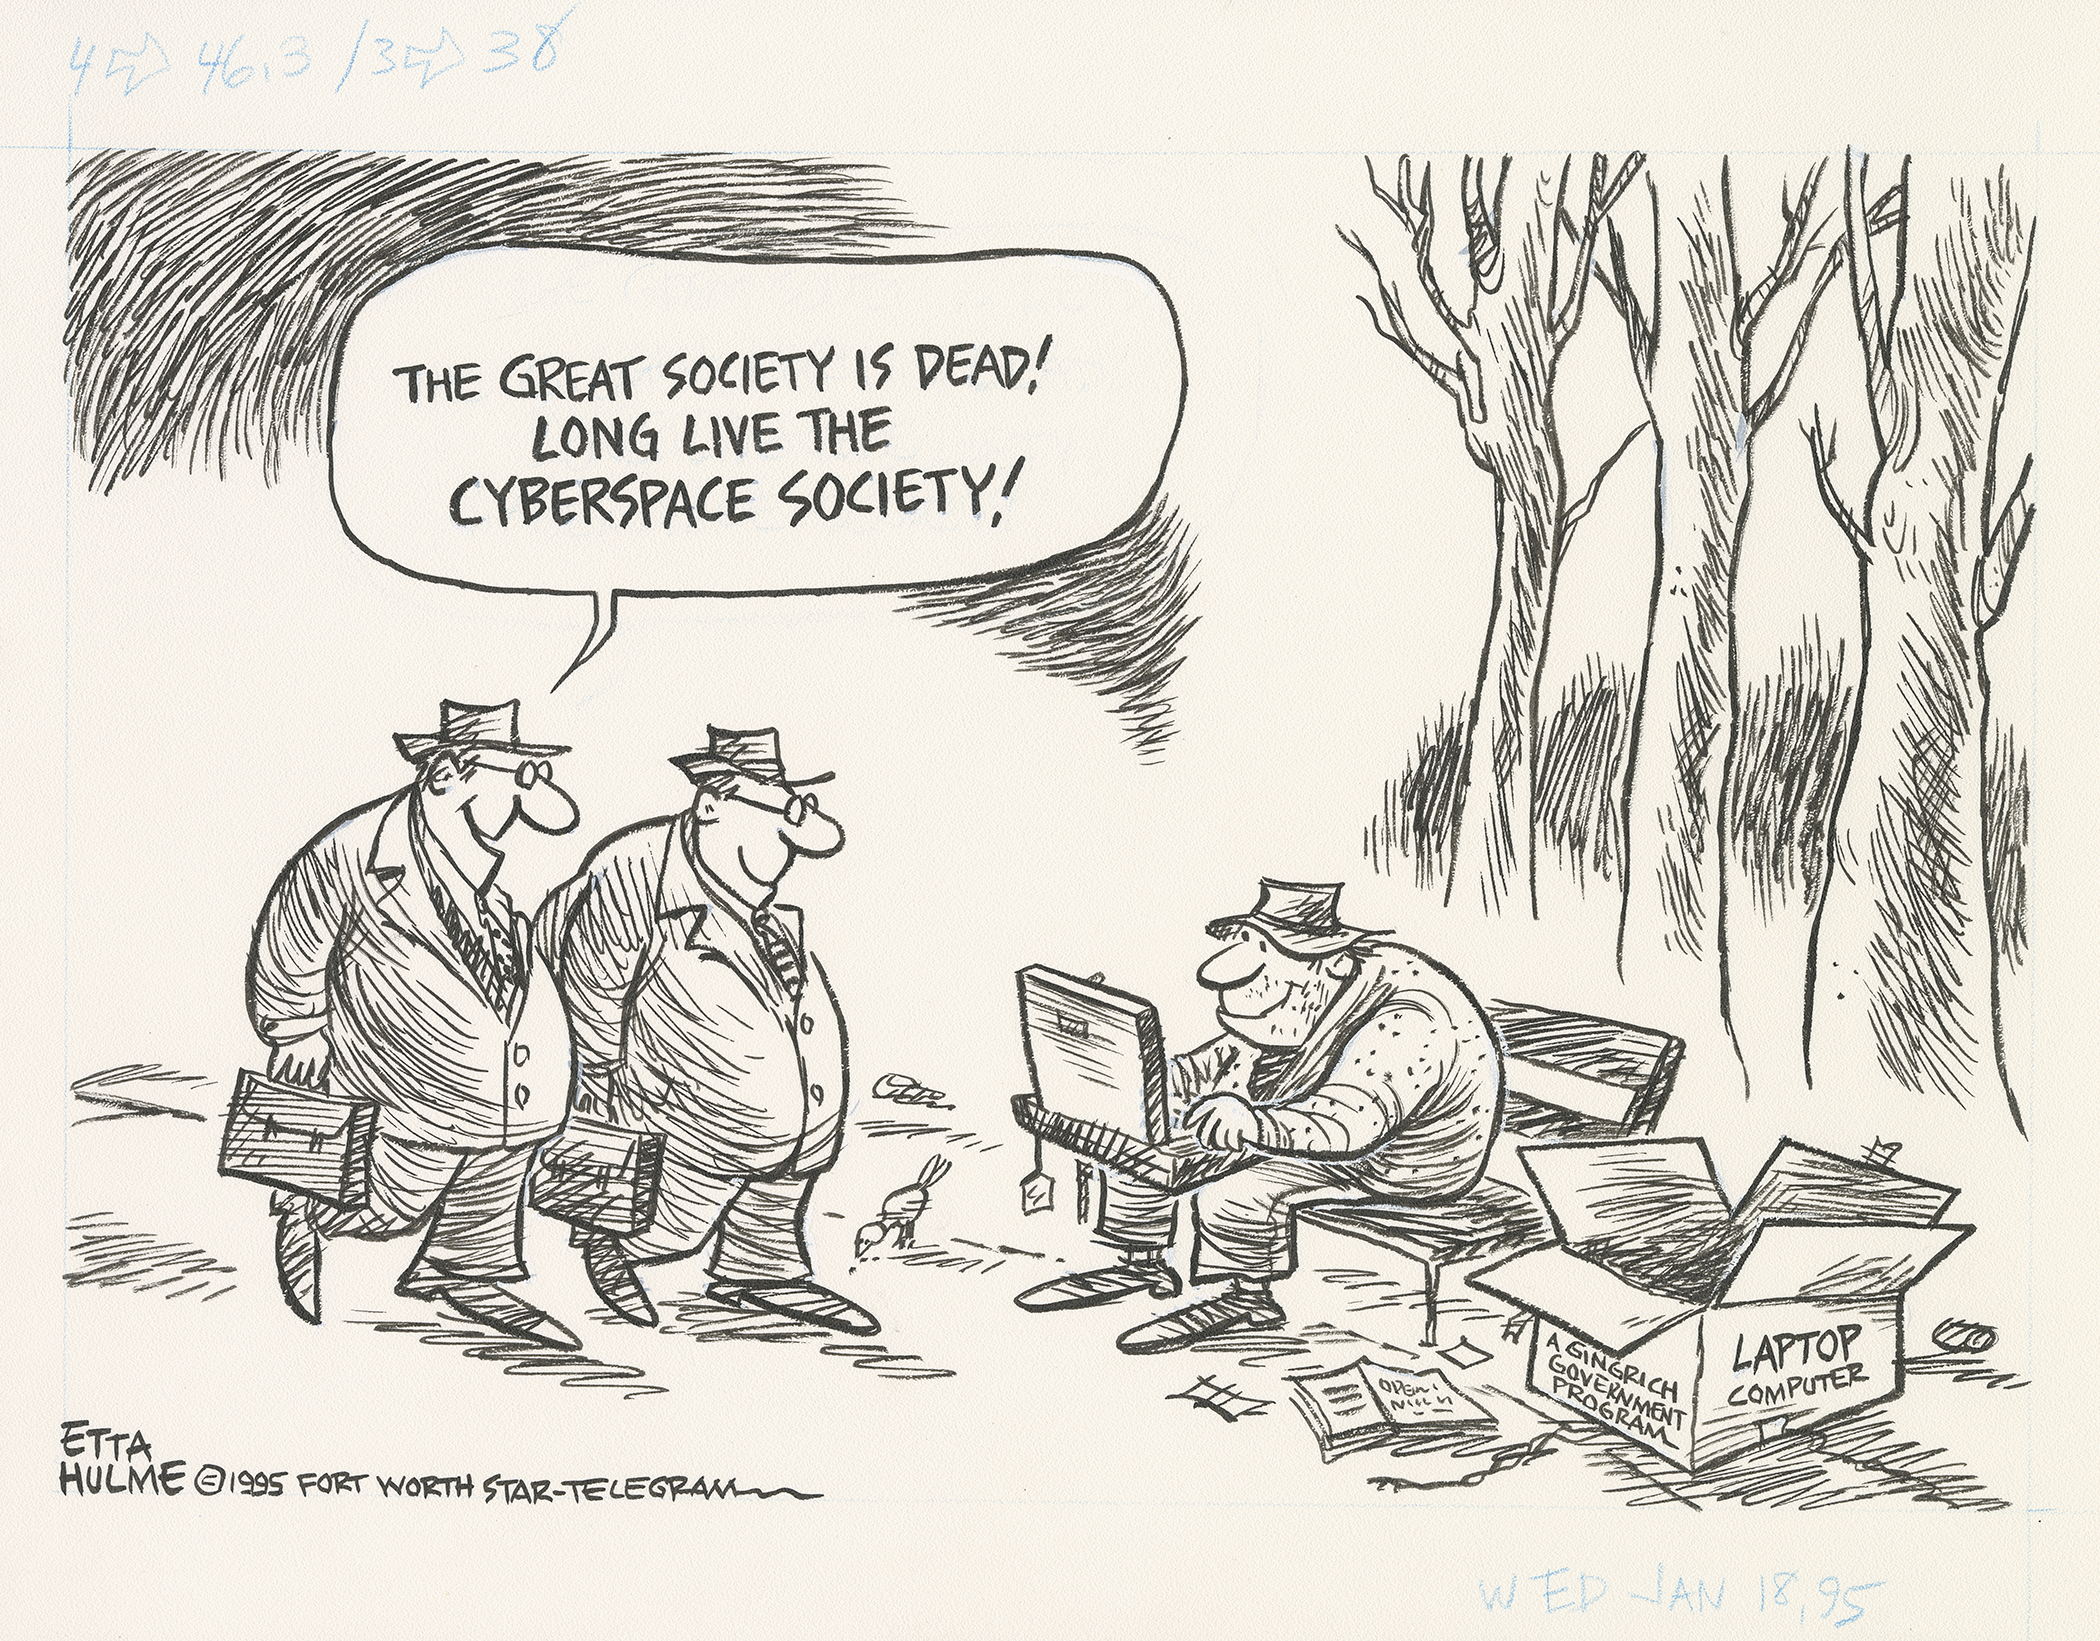 Long live the Cyberspace Society!